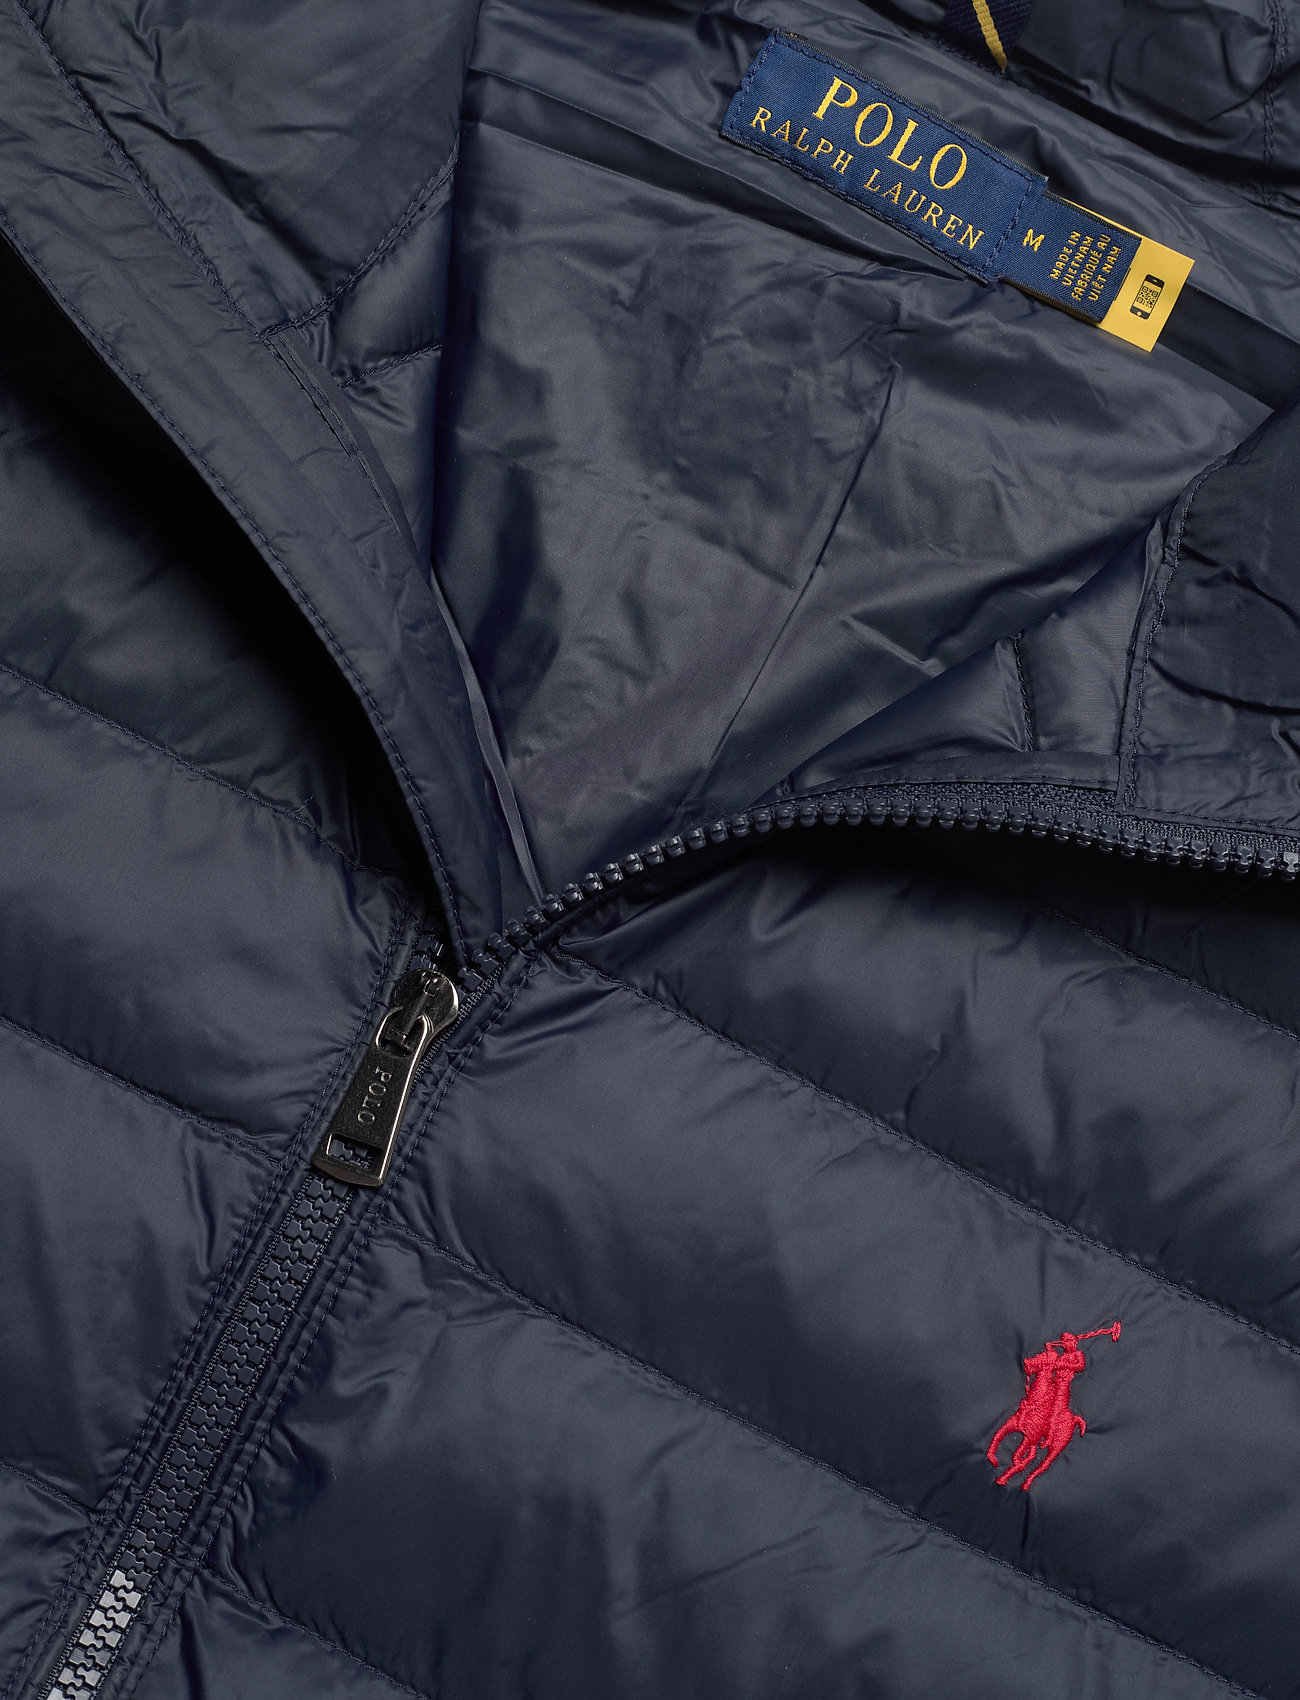 Polo Ralph Lauren - The Packable Jacket - toppatakit - collection navy - 3